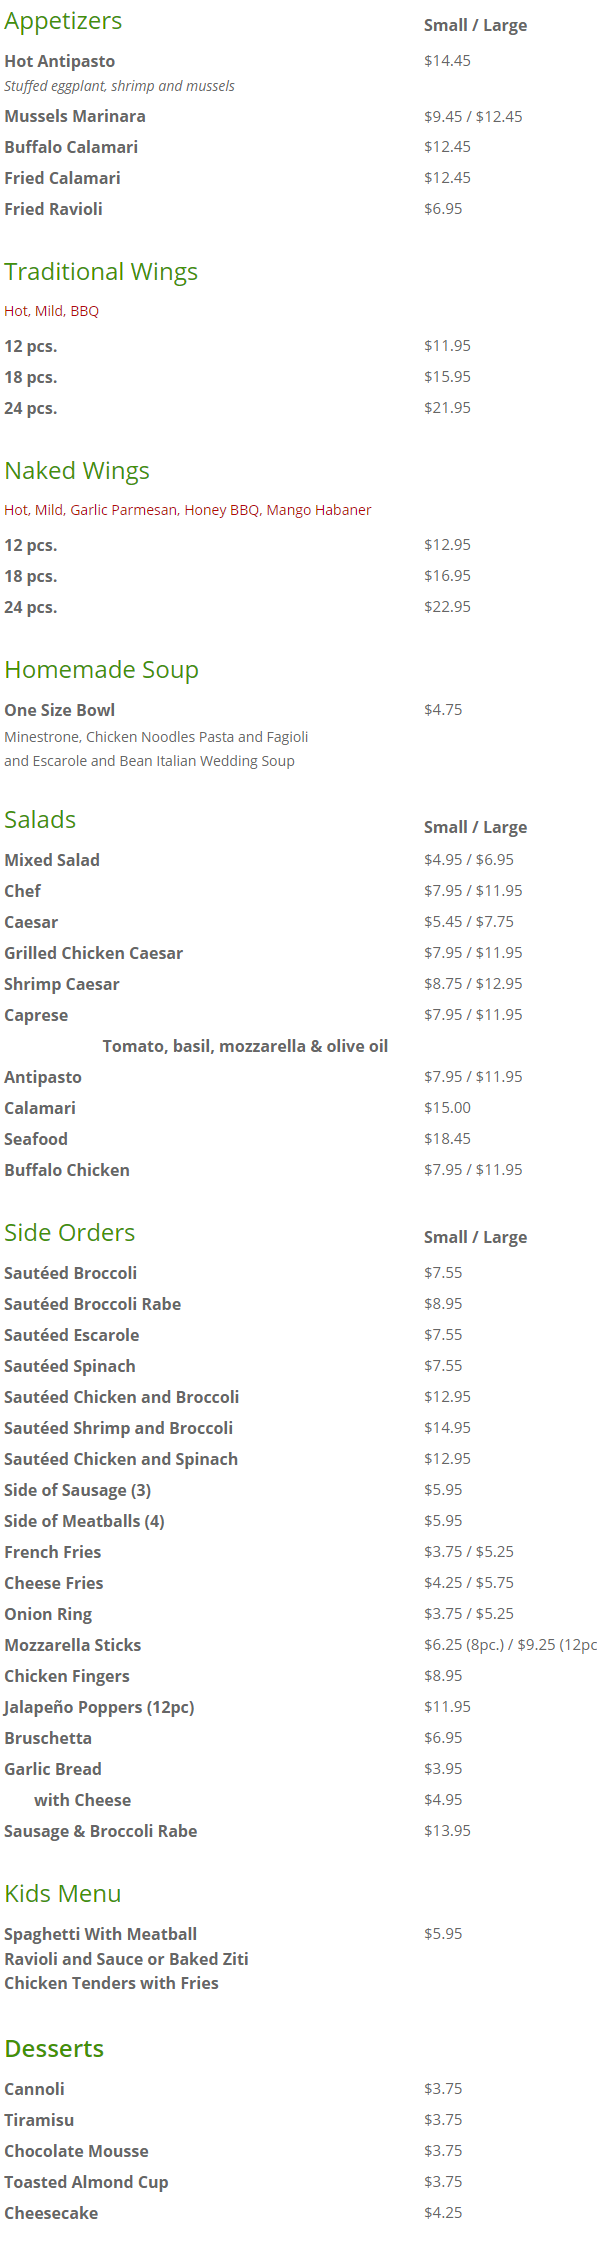 Appetizers and Salads Menu